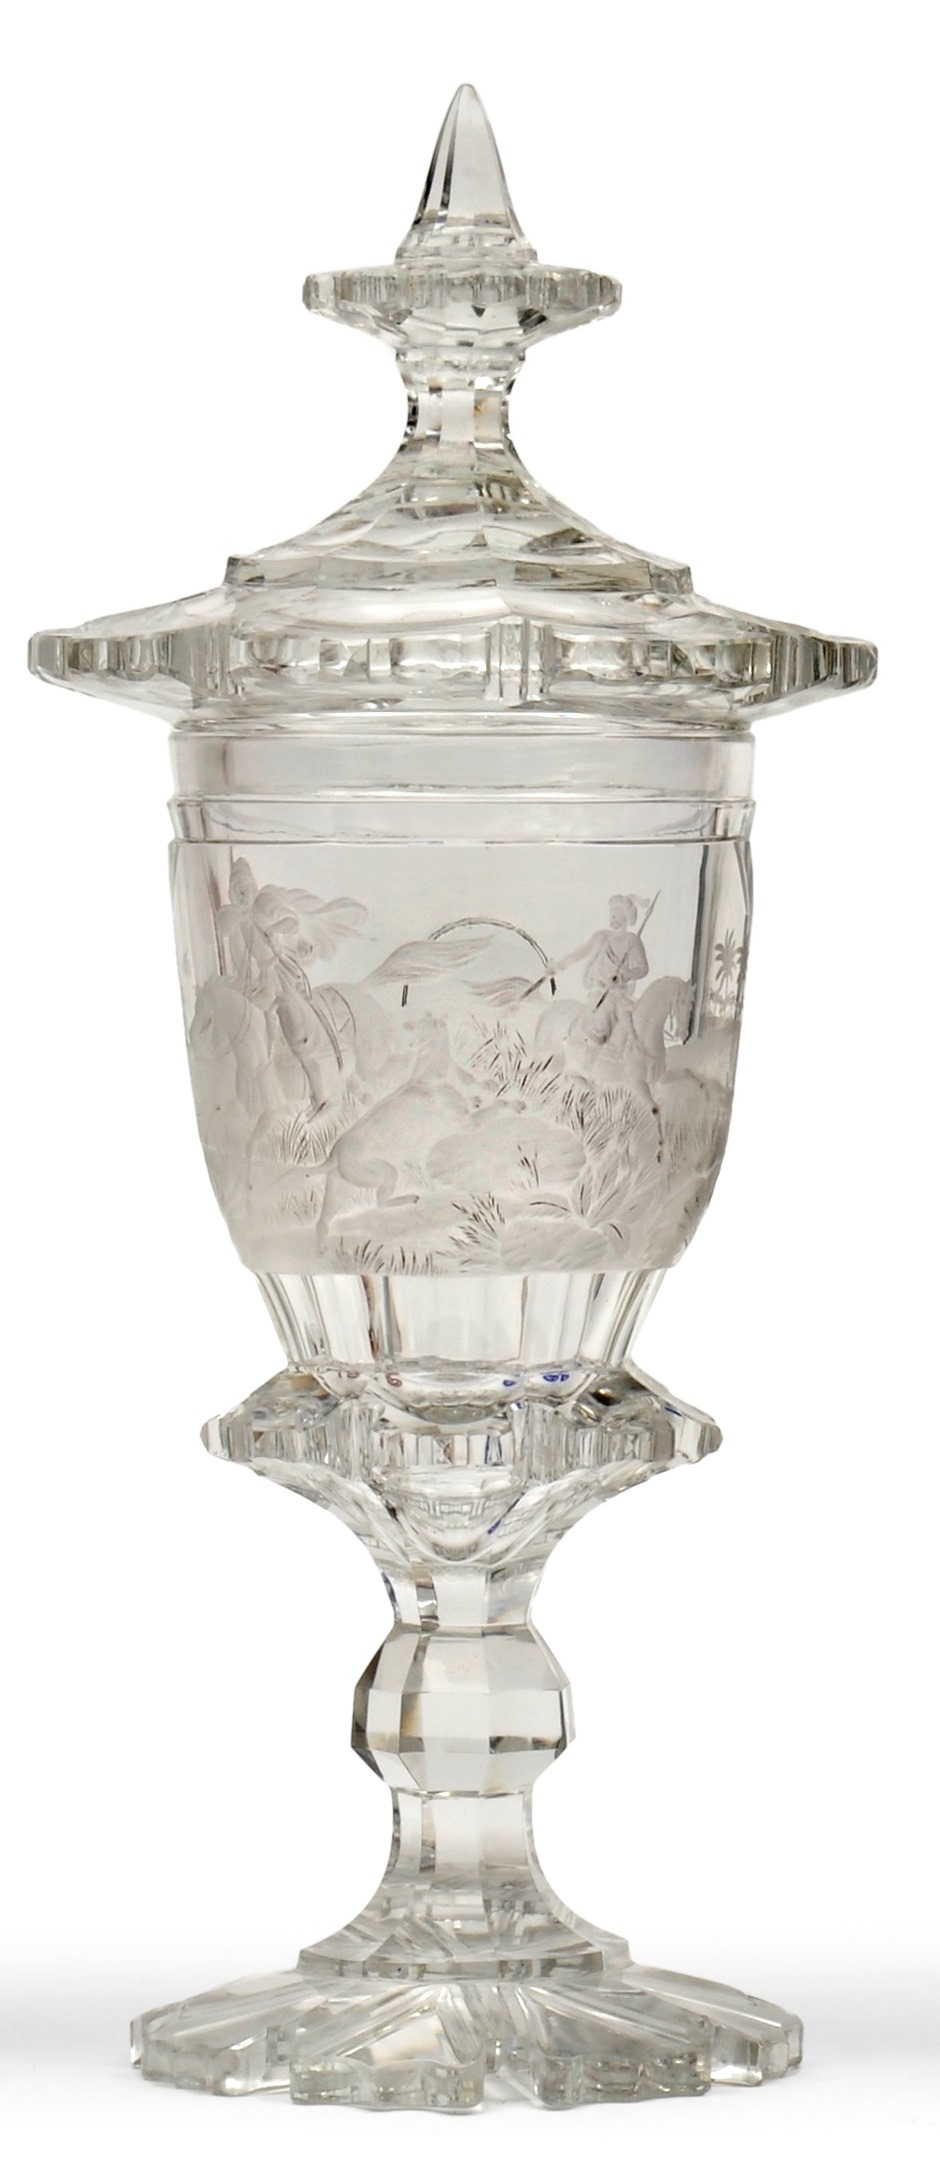 A Bohemian Glass Goblet and Cover, mid 19th century, with minaret finial, the ovoid body engraved